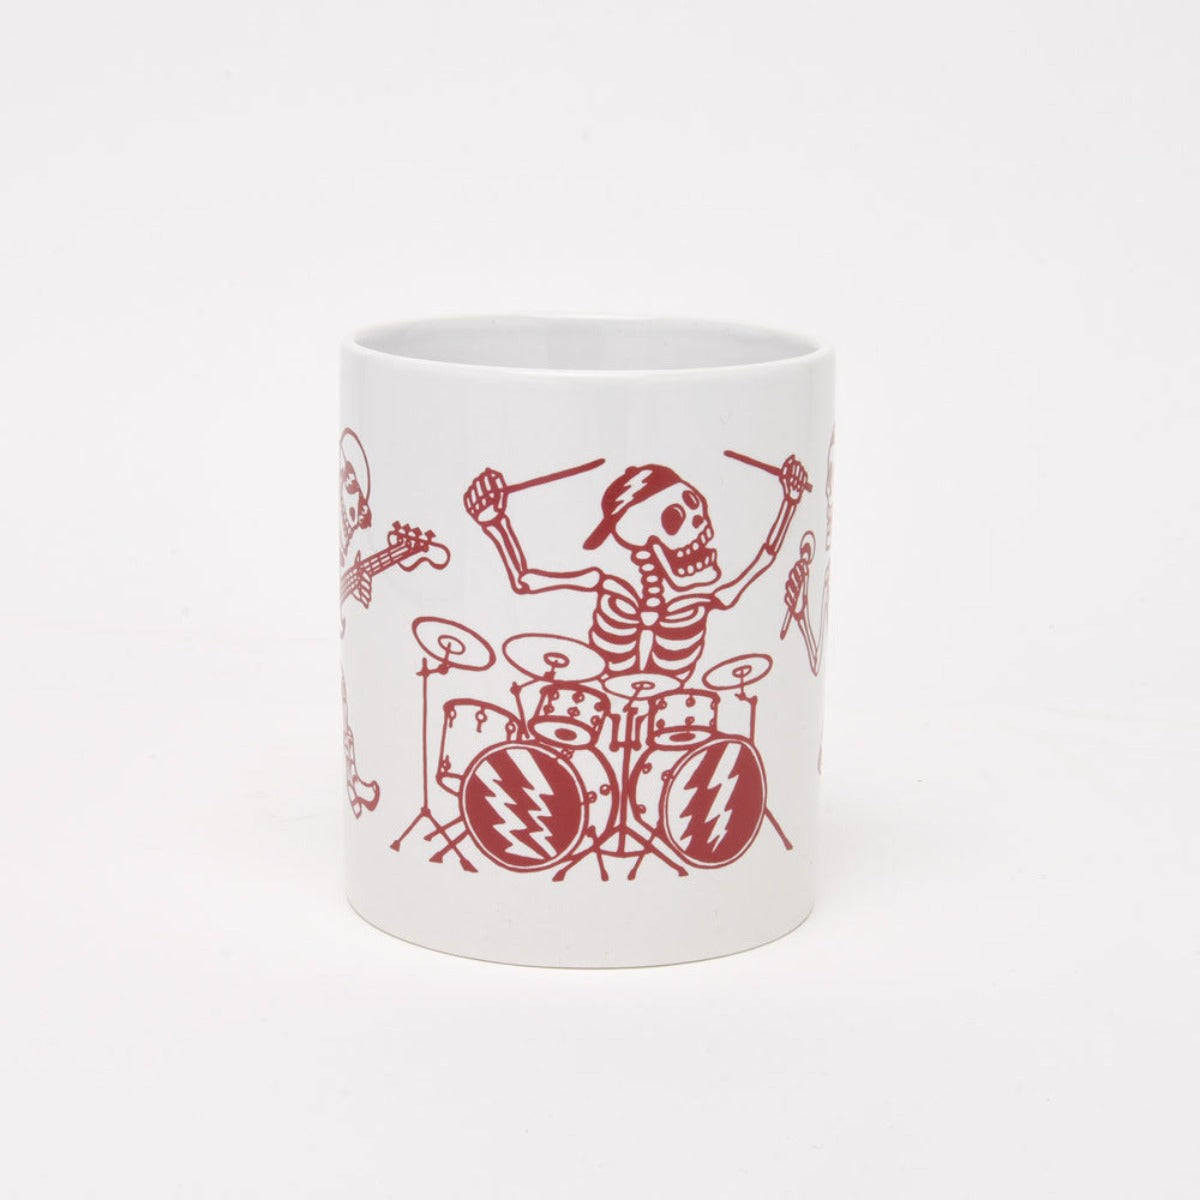 The Band Skeleton Day of the Dead Mug